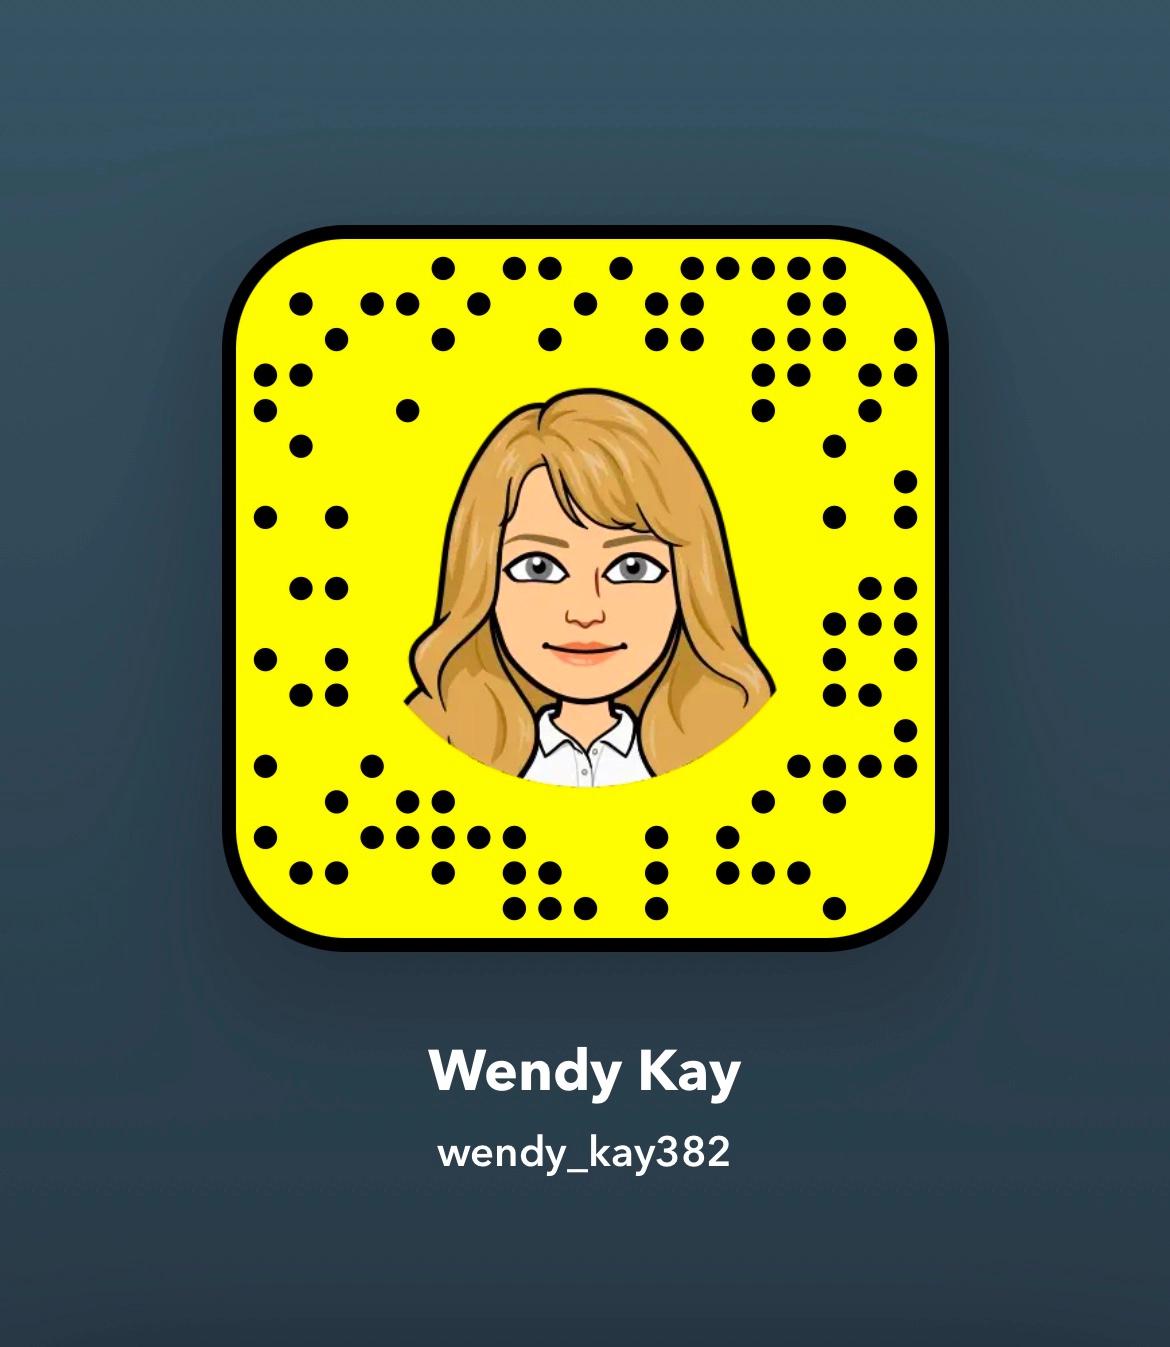 Add me on Snapchat: wendy_kay382 or (805) 307-5194